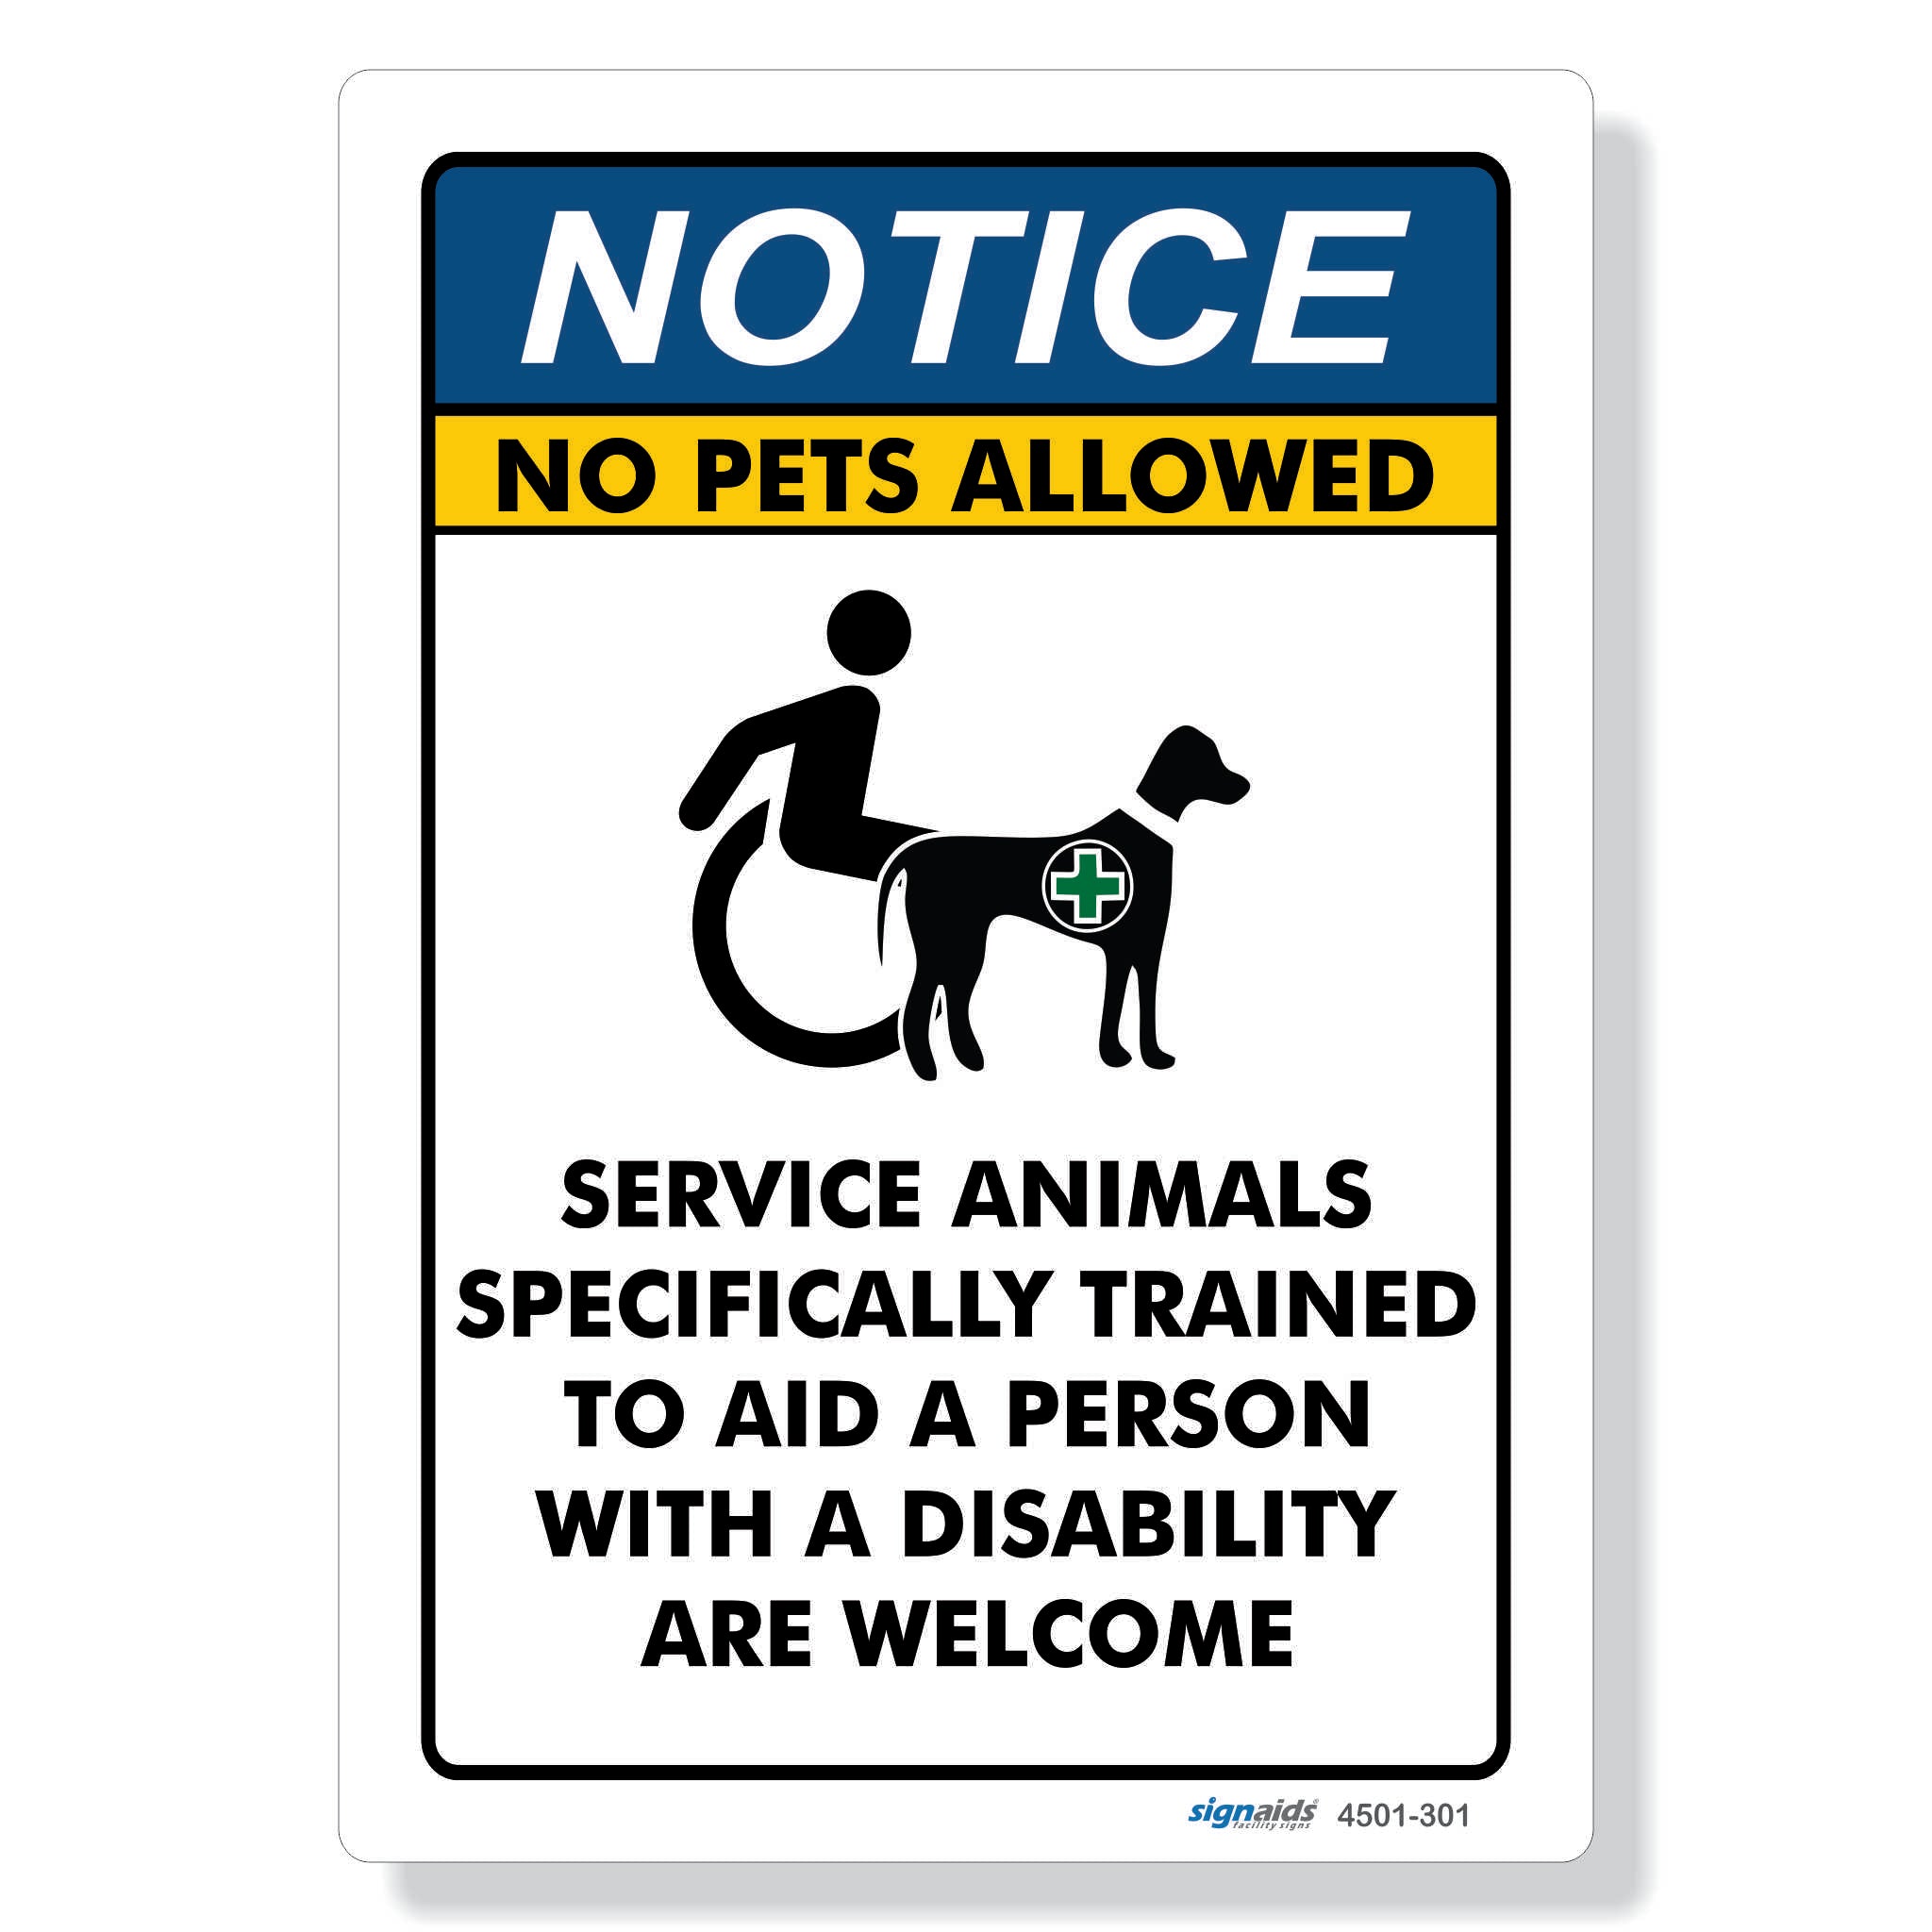 NOTICE - No pets allowed, service animals welcome